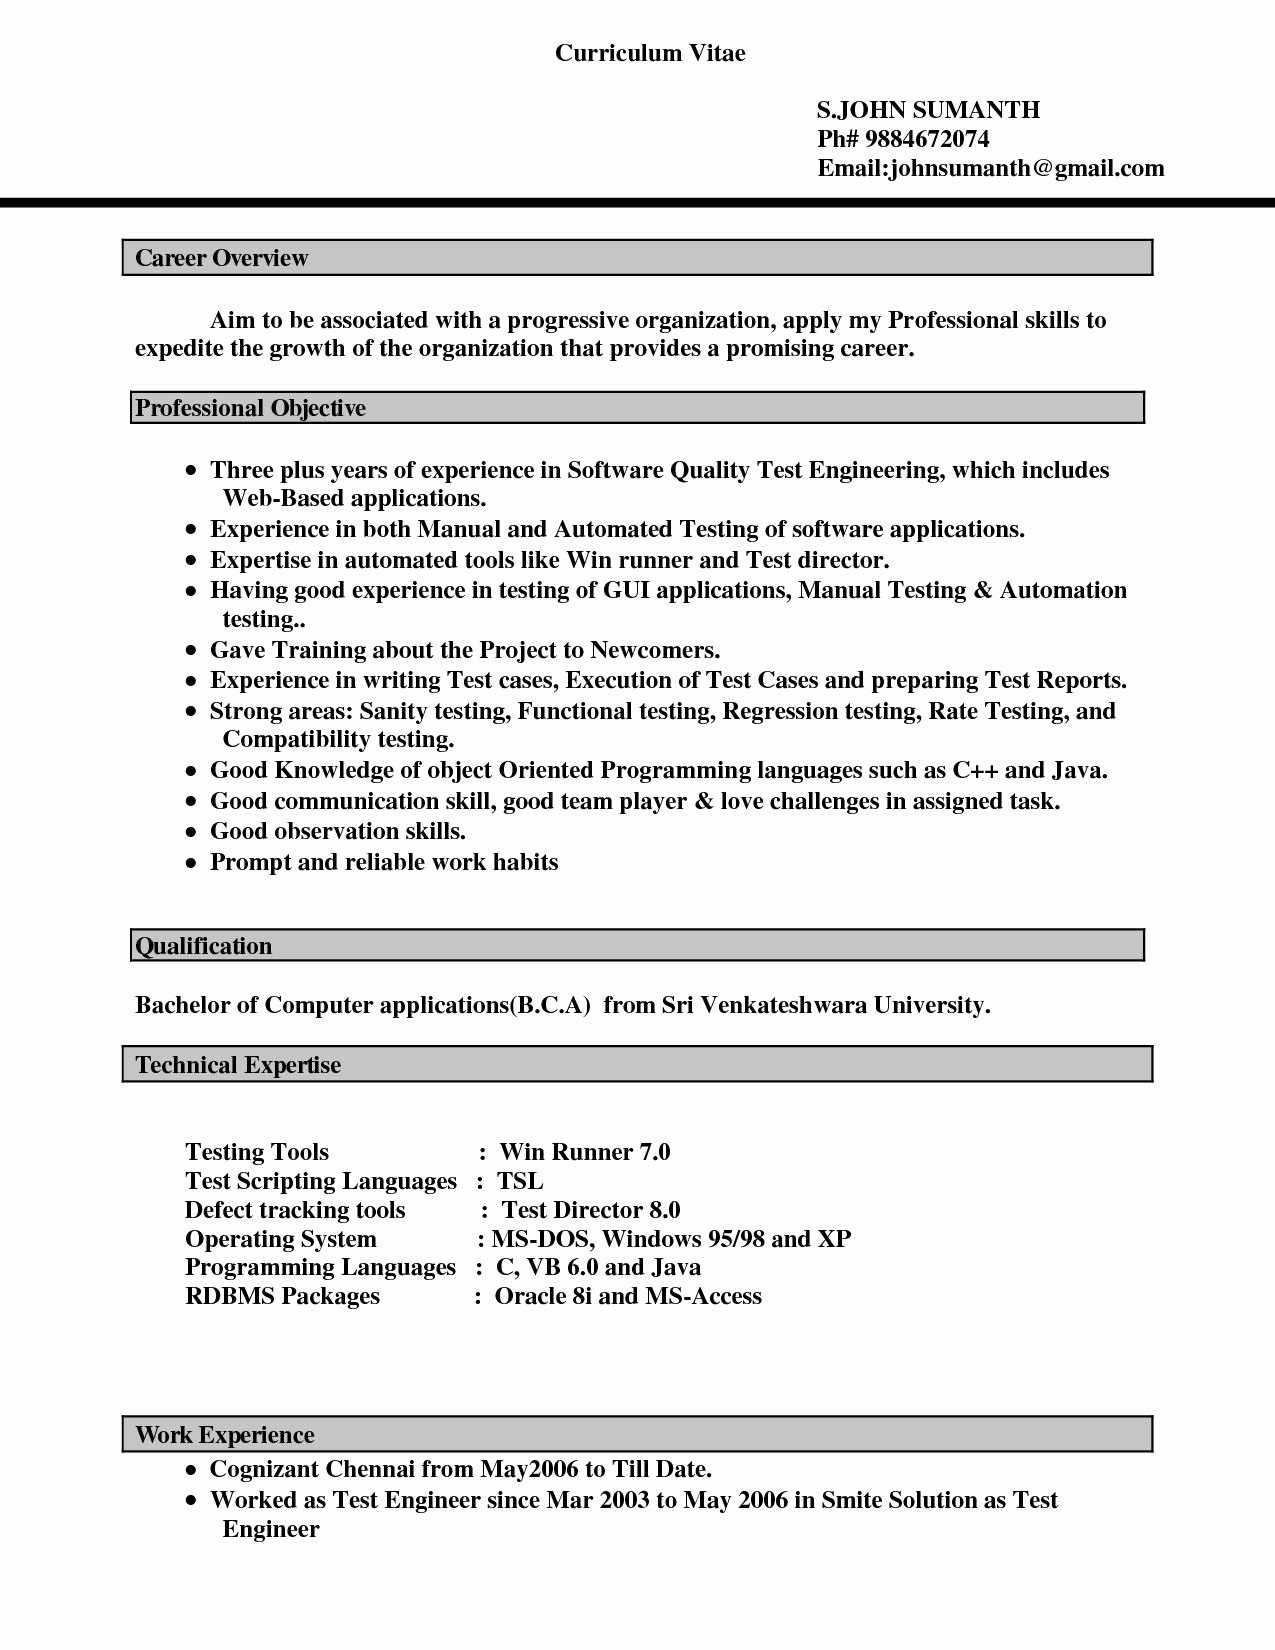 Ms Word Resume Examples New New Resume format Download Ms Word E8bb220a8 New Ms Word